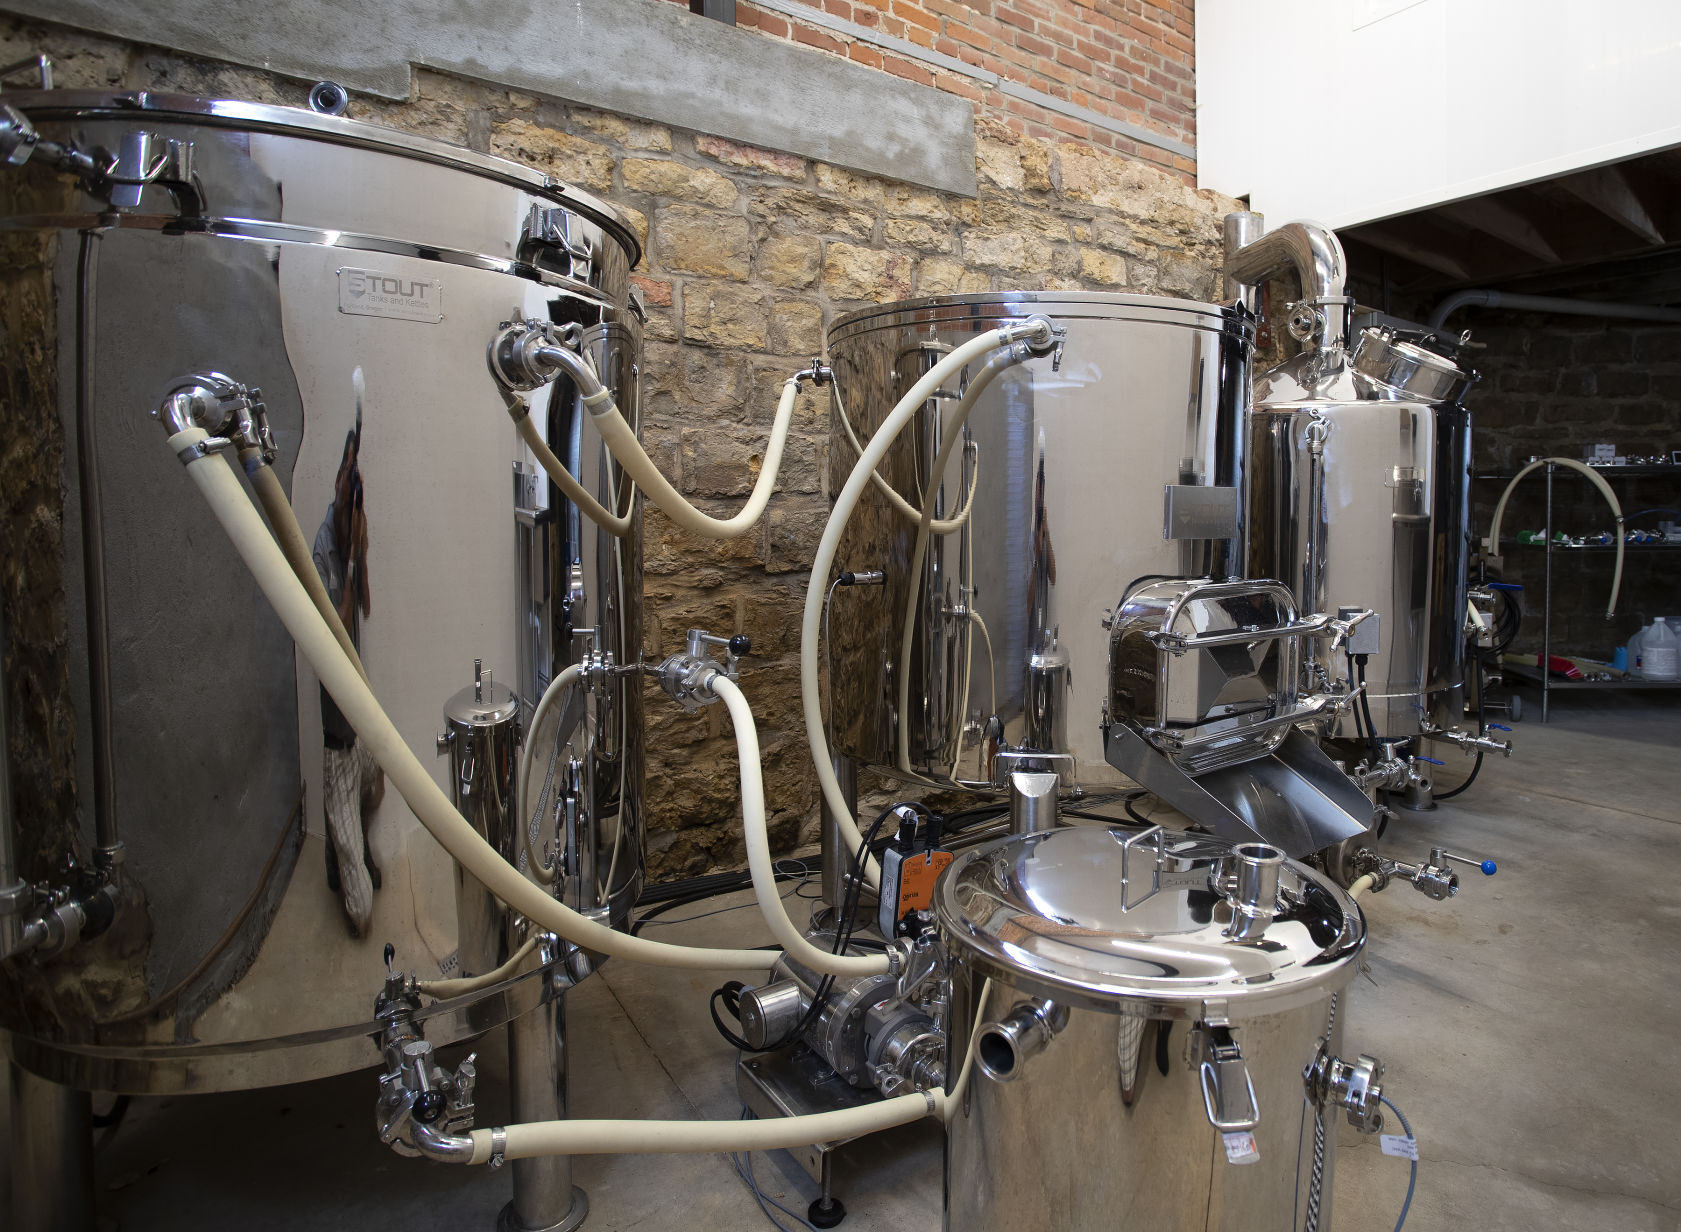 The basement brewhouse at Mud Run Beer Co. in Stockton, Ill., on Thursday. PHOTO CREDIT: Stephen Gassman